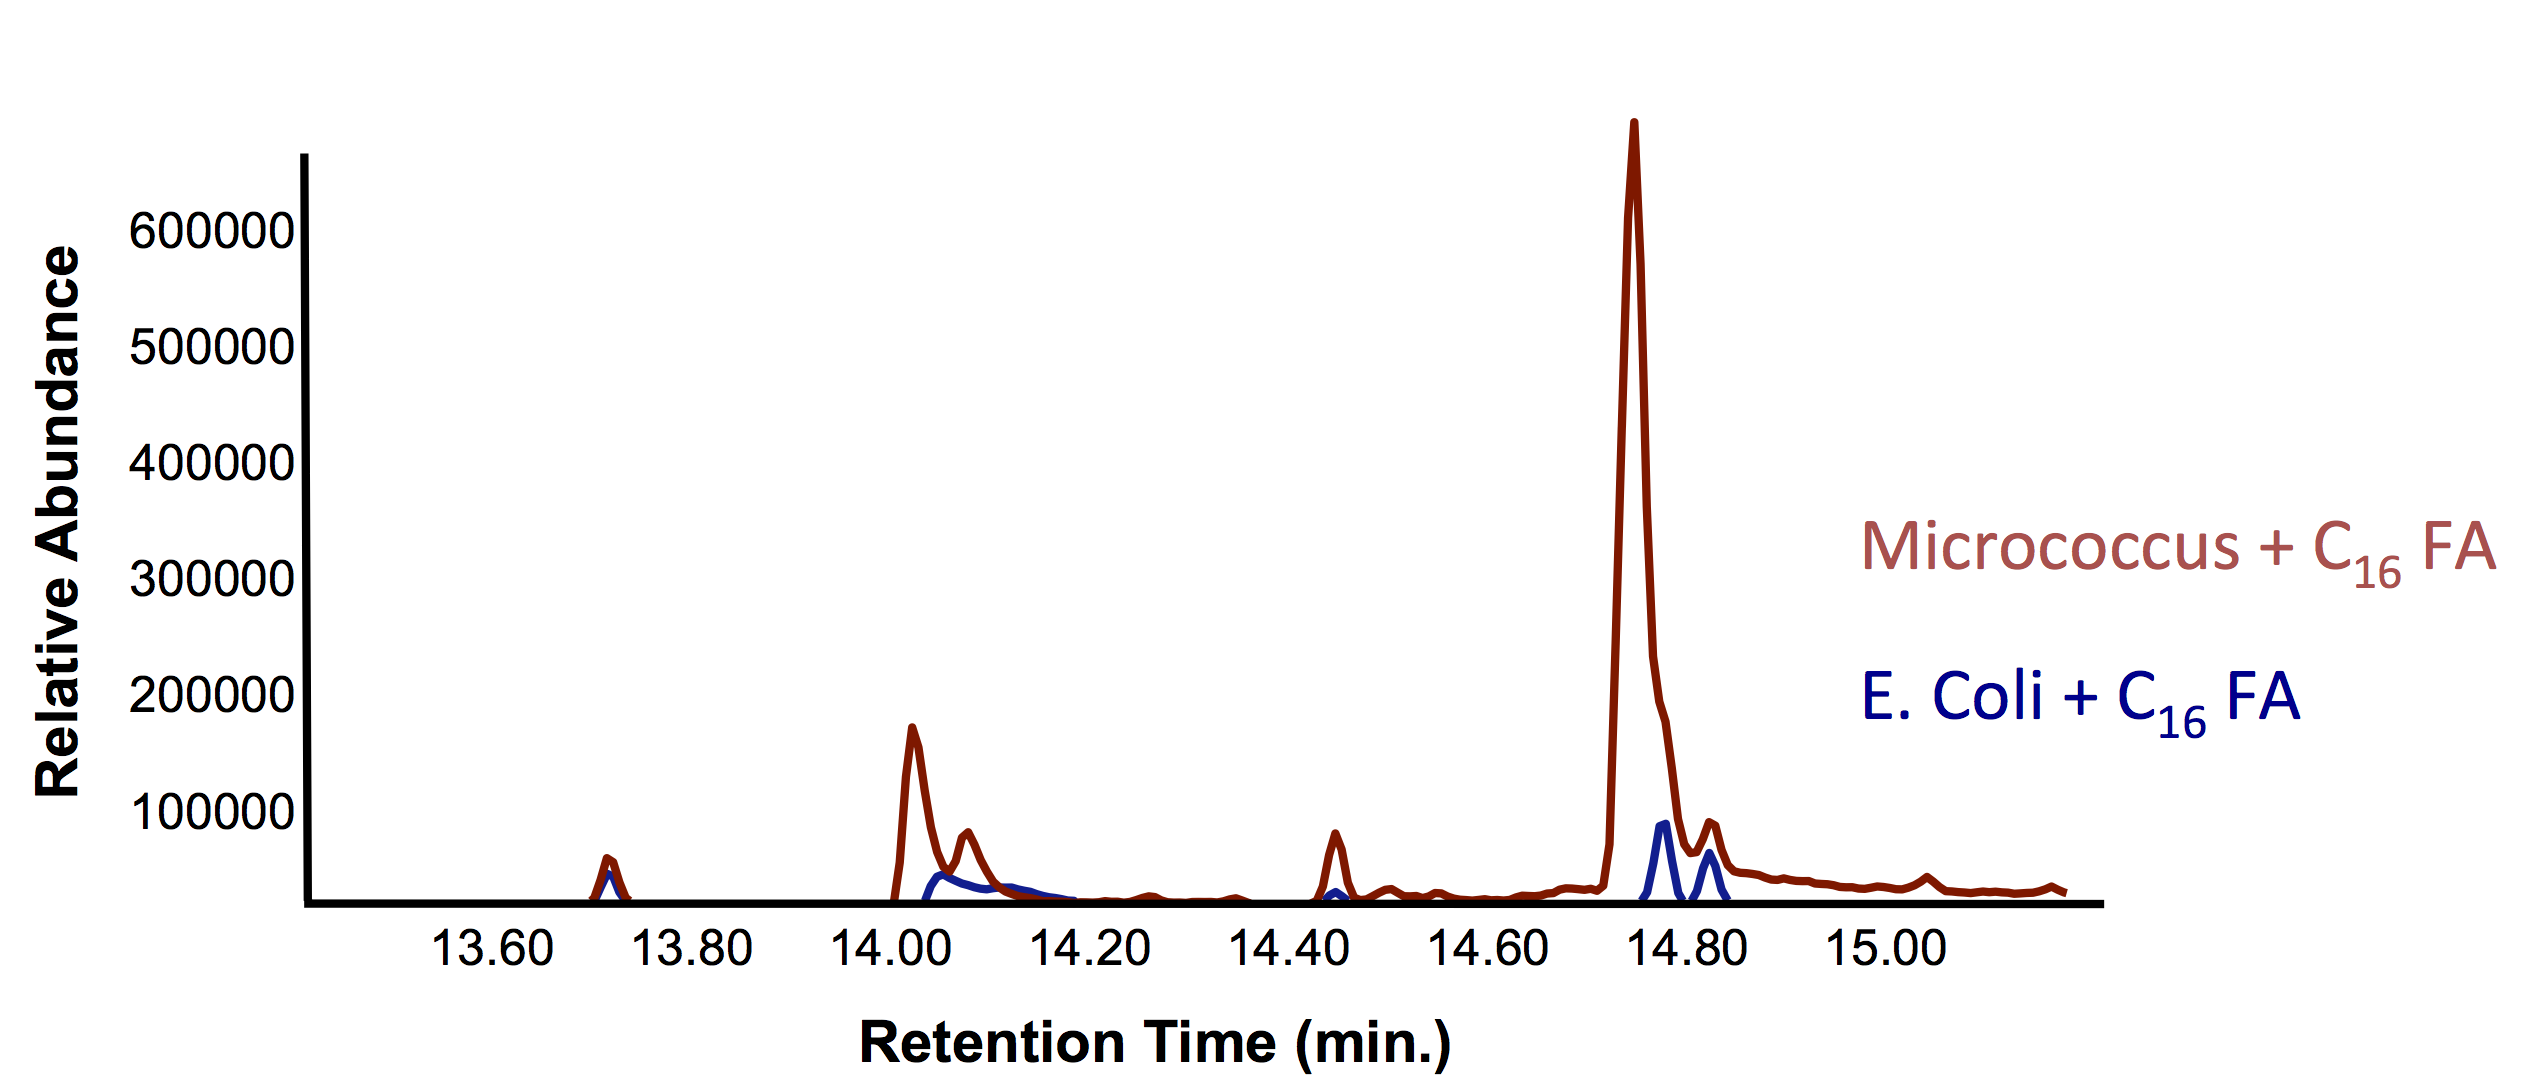 Figure 8.  Gas chromatograph demonstrating the production of olefins (alkenes) from fatty acids as shown from the increase in the peak with a retention time of 14.7 min.  The dramatic change in peak intensity at this point suggests that we are producing hydrocarbons.